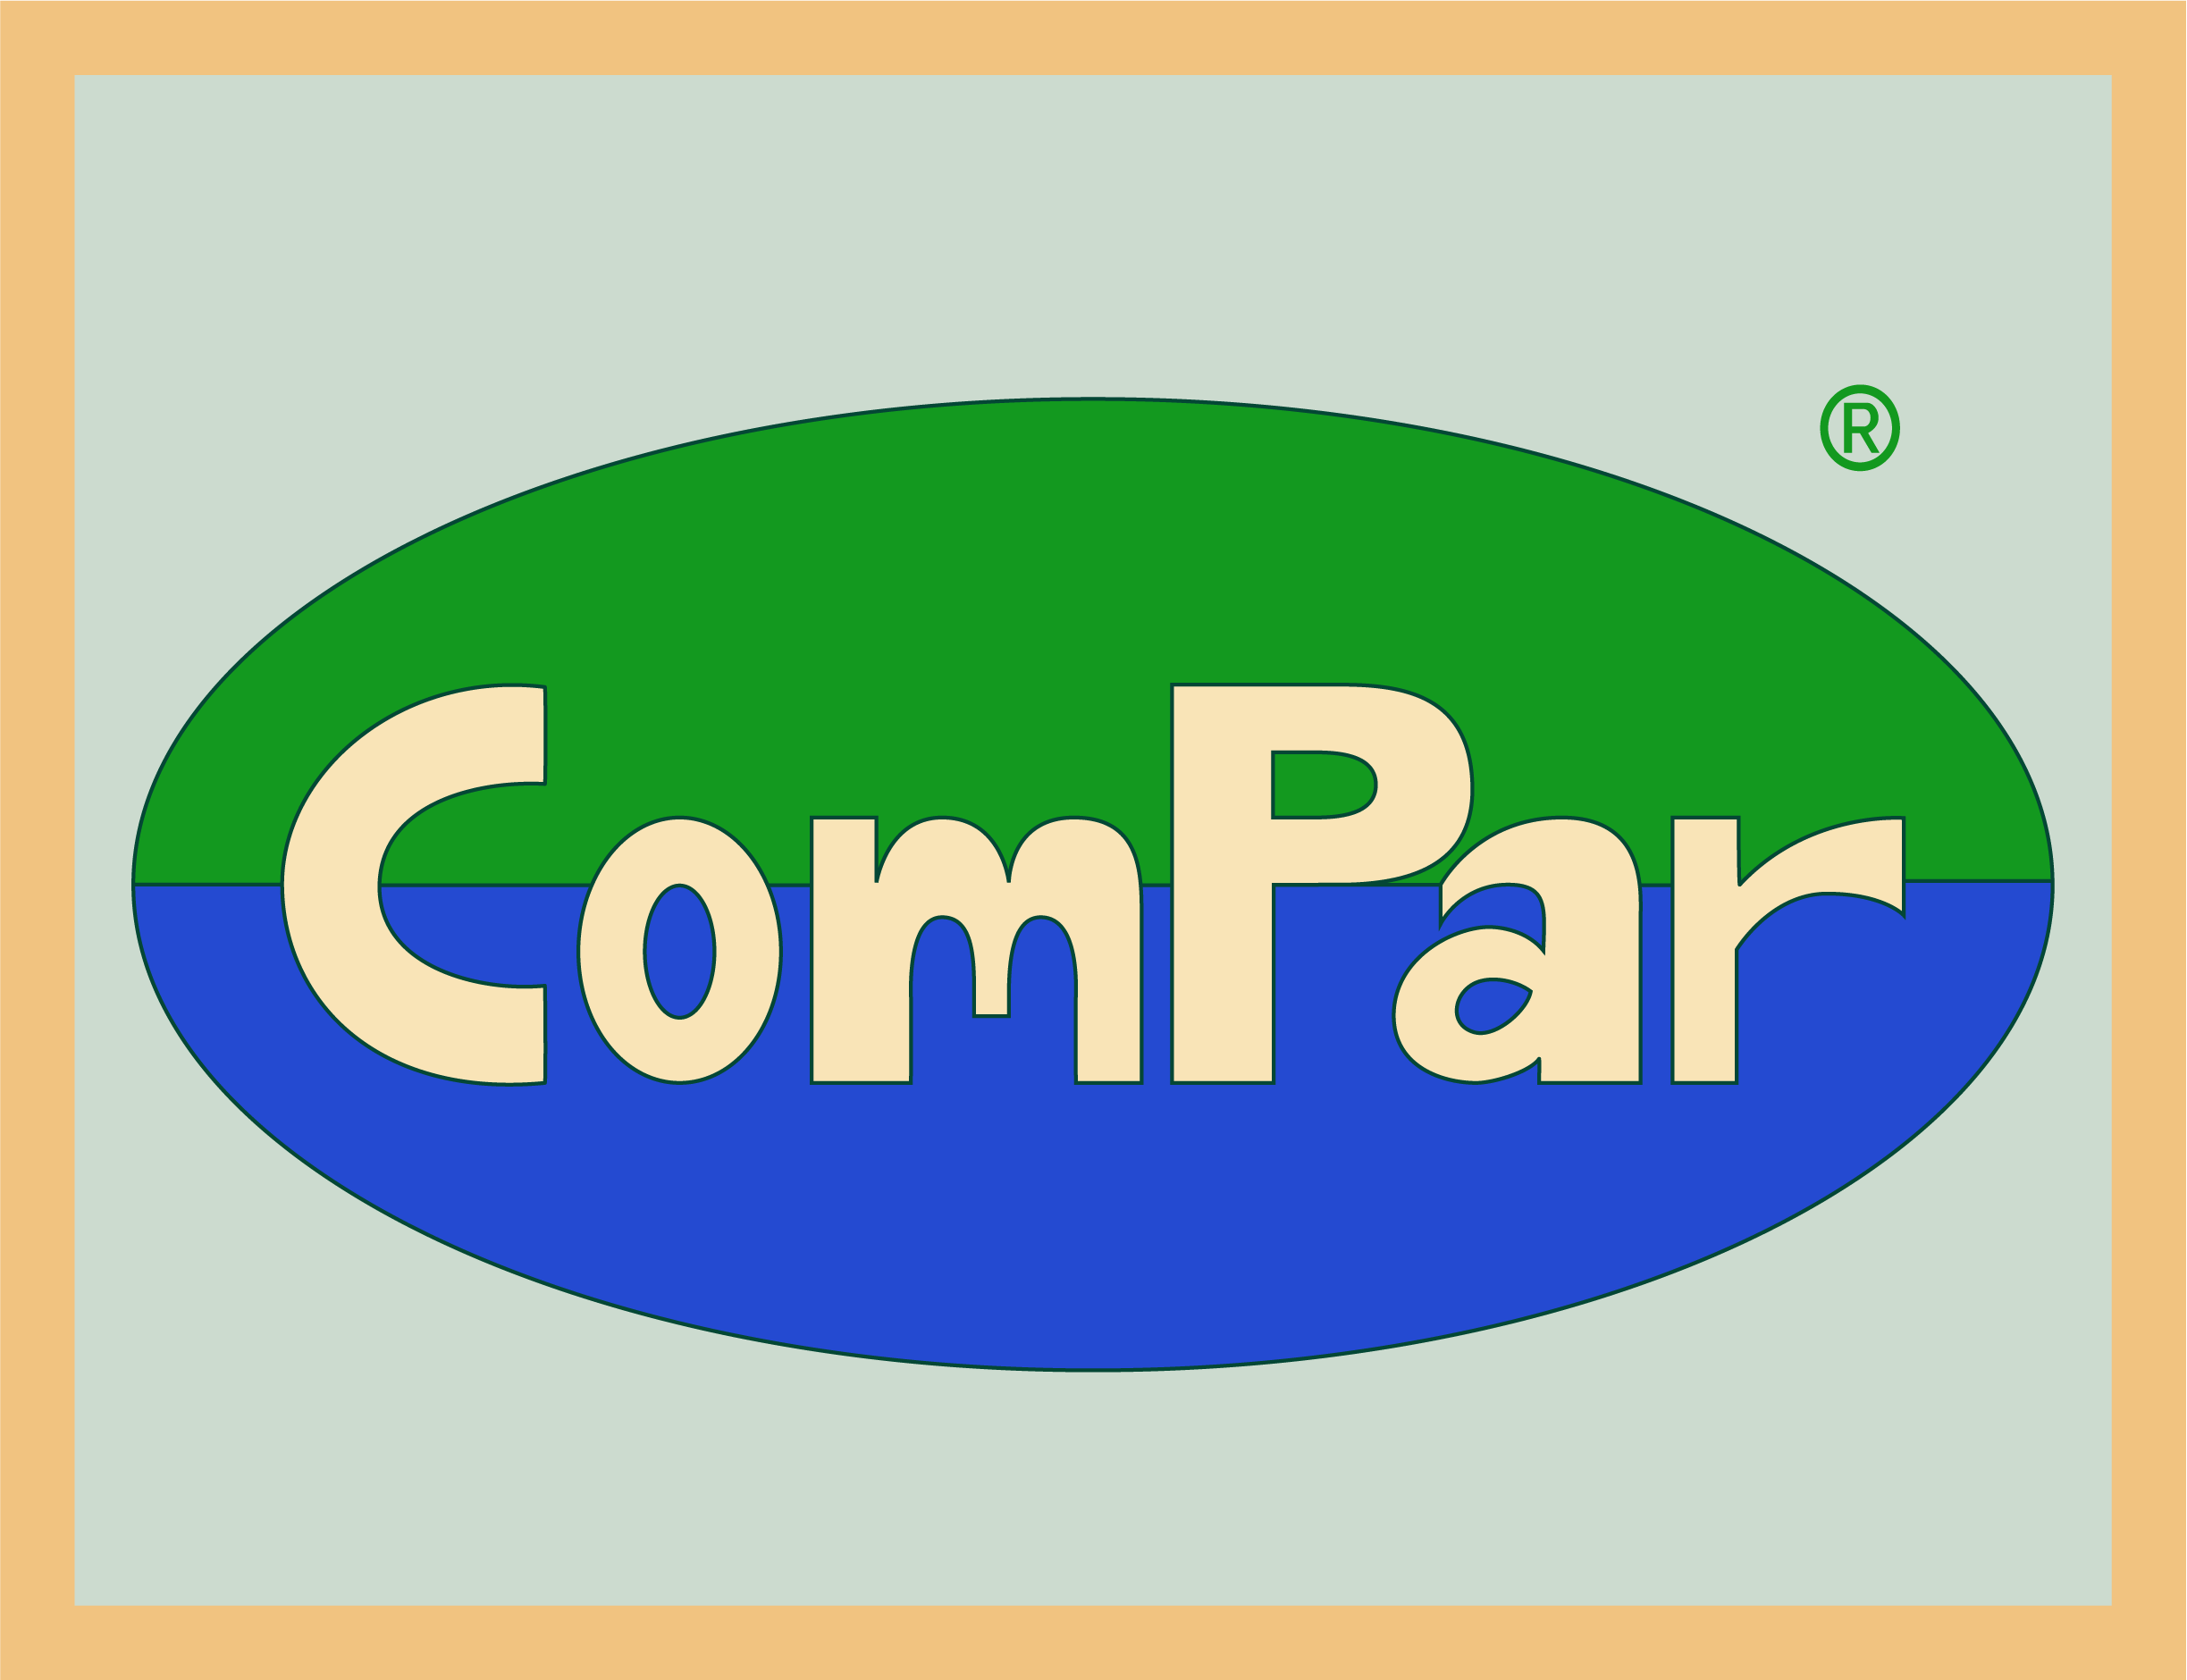 Logo of COMPAR - the research product that is the 'parent leadership profiler'